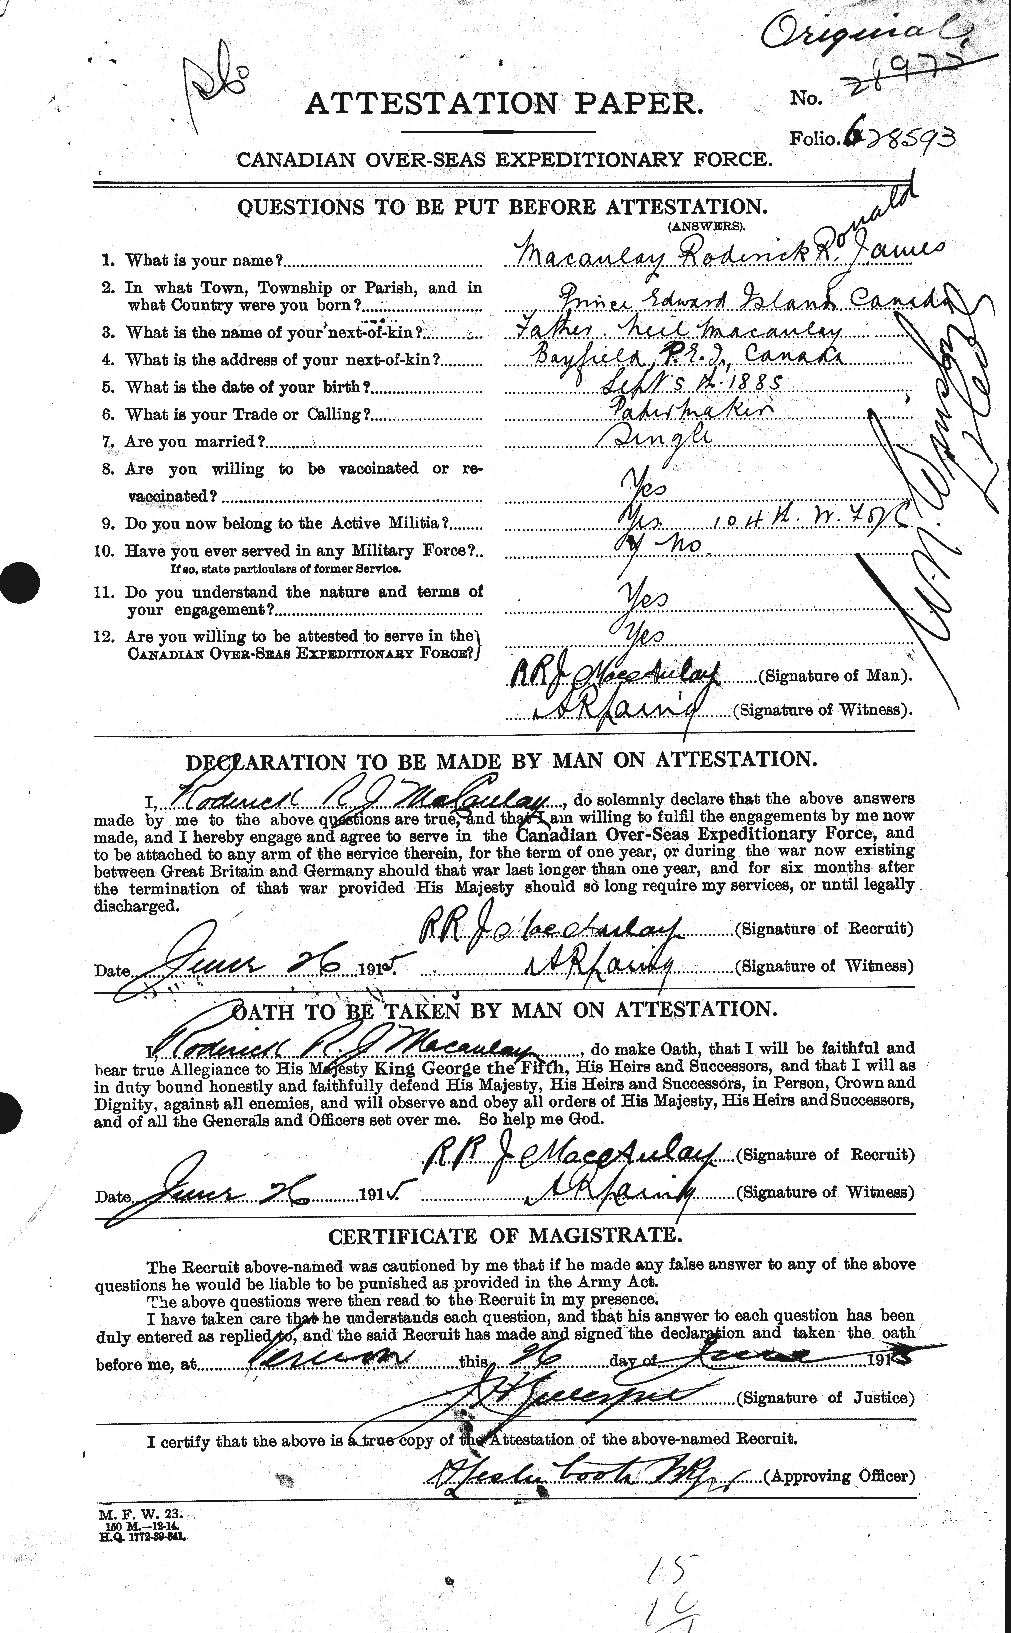 Personnel Records of the First World War - CEF 130733a